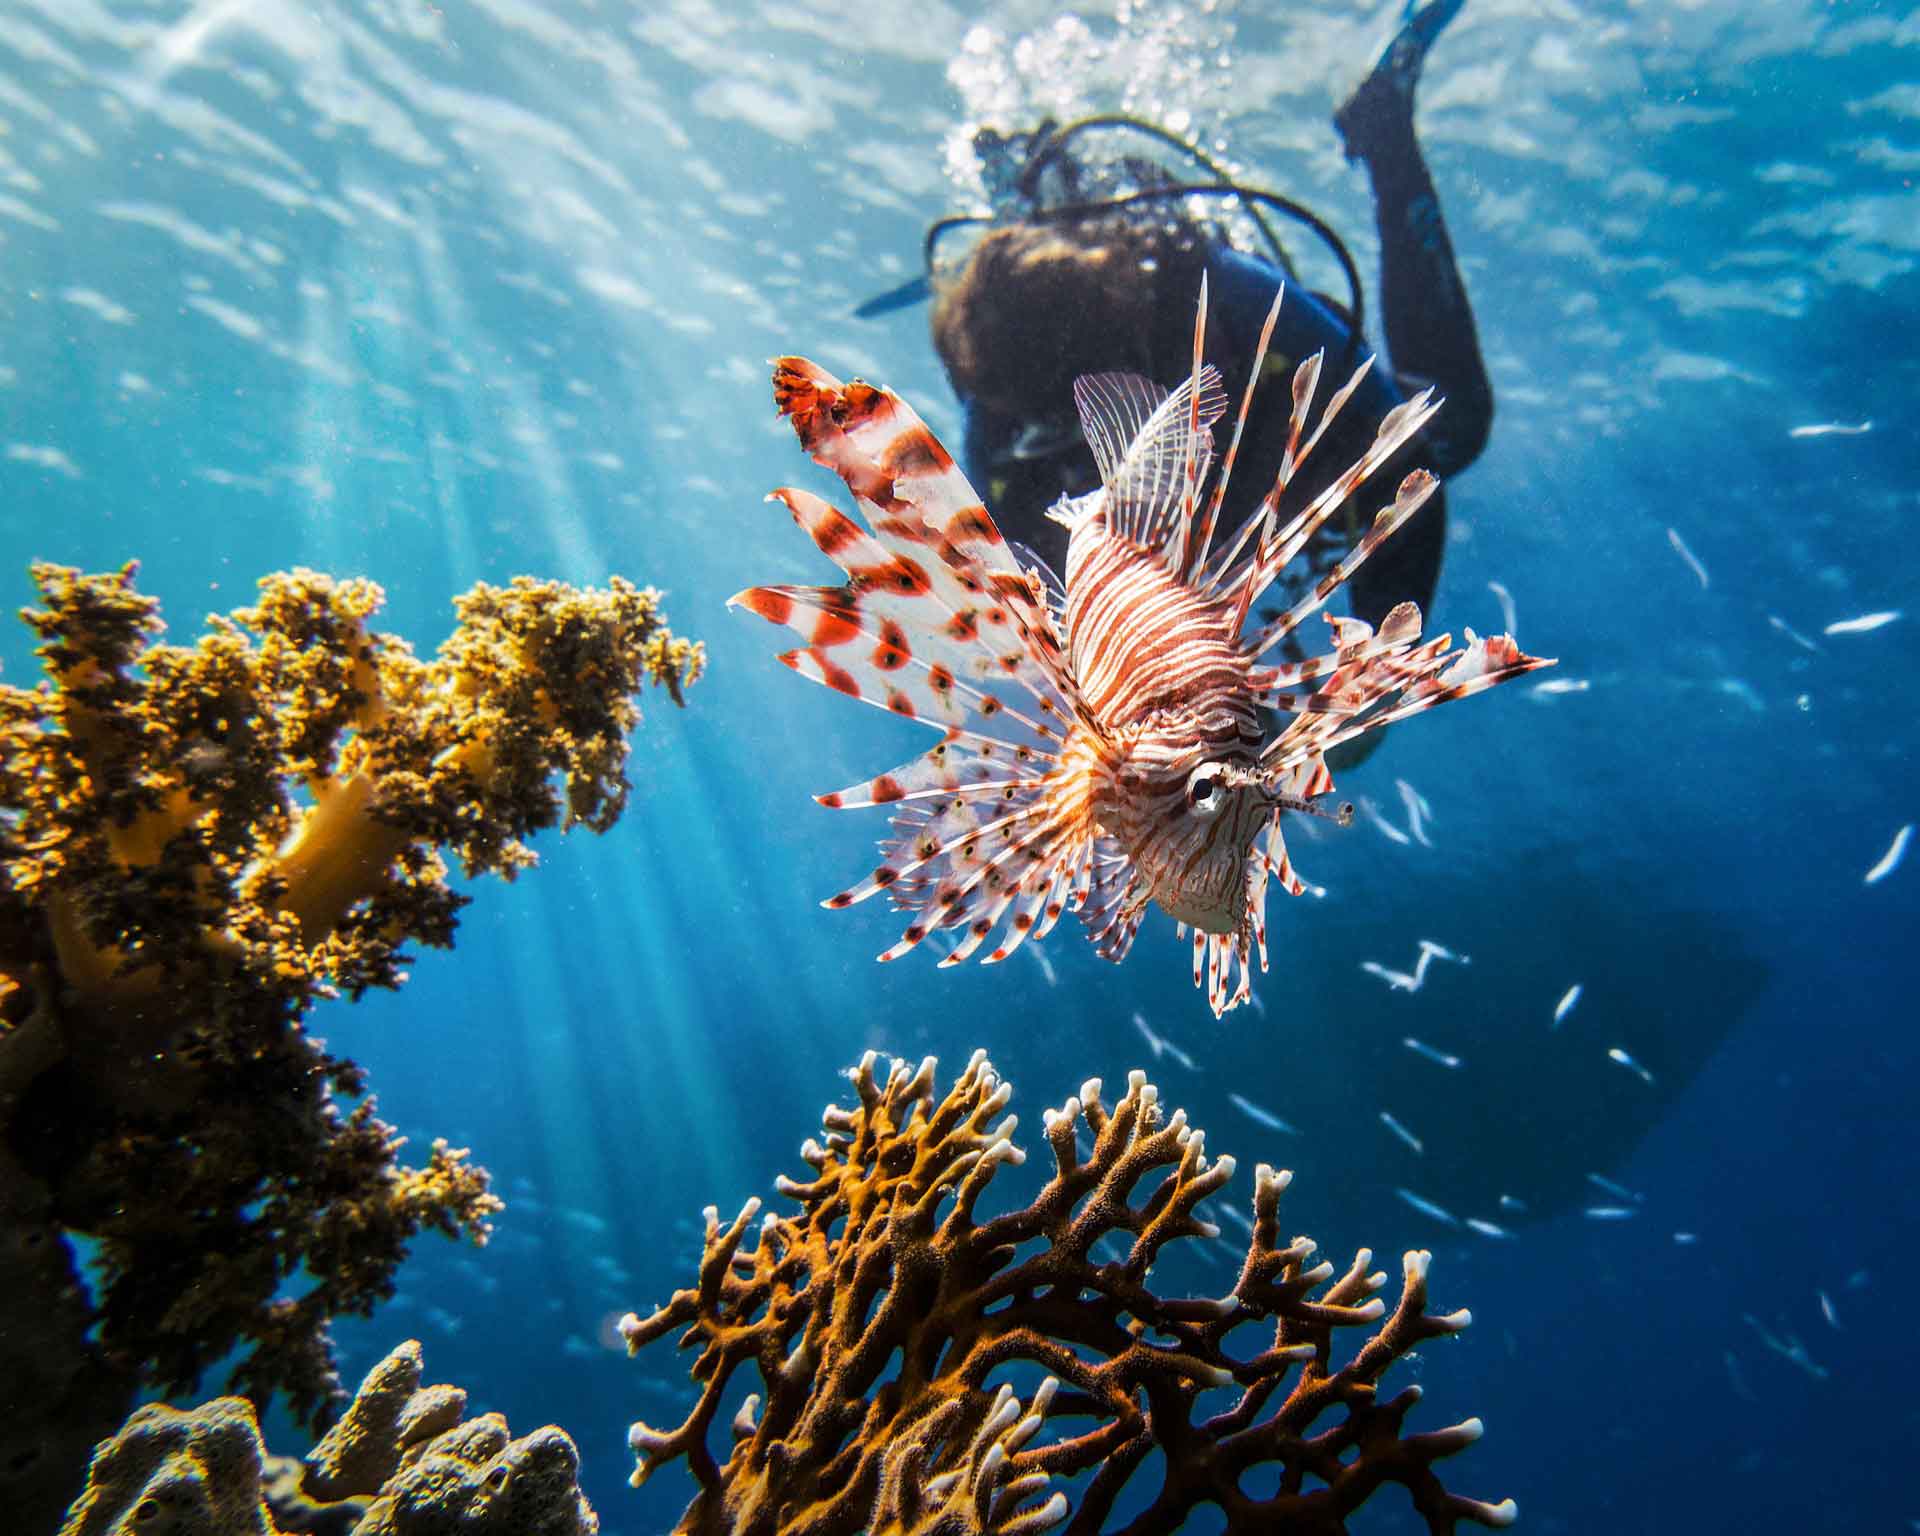 Lion fish on reef with diver in the background